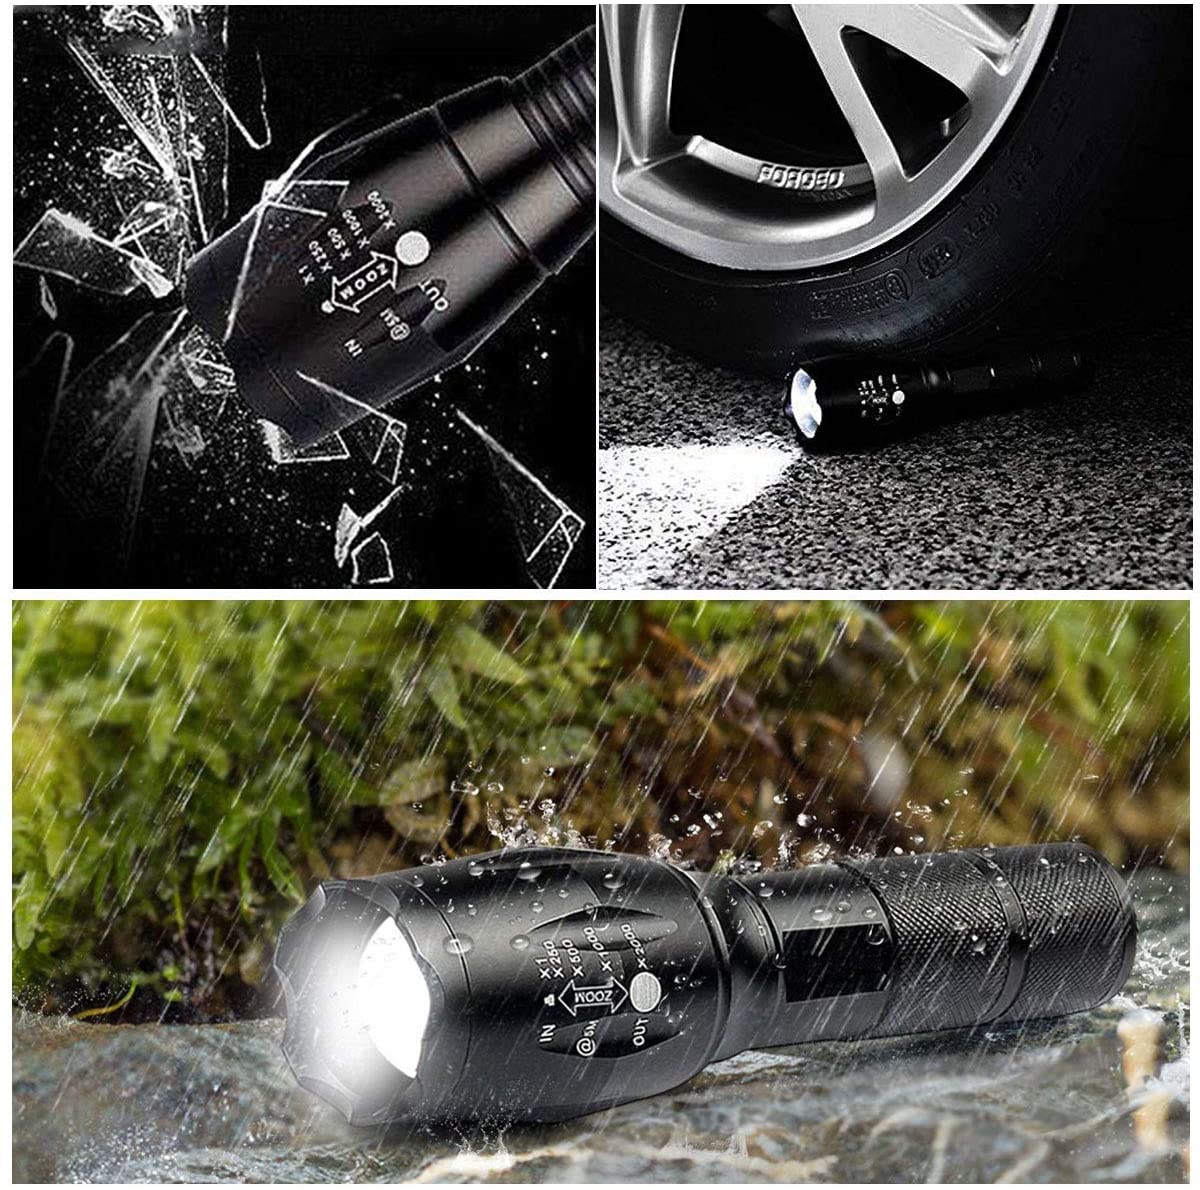 Eagle Eye X700 is the “Must-Have” Tactical Flashlight You Need in 2020